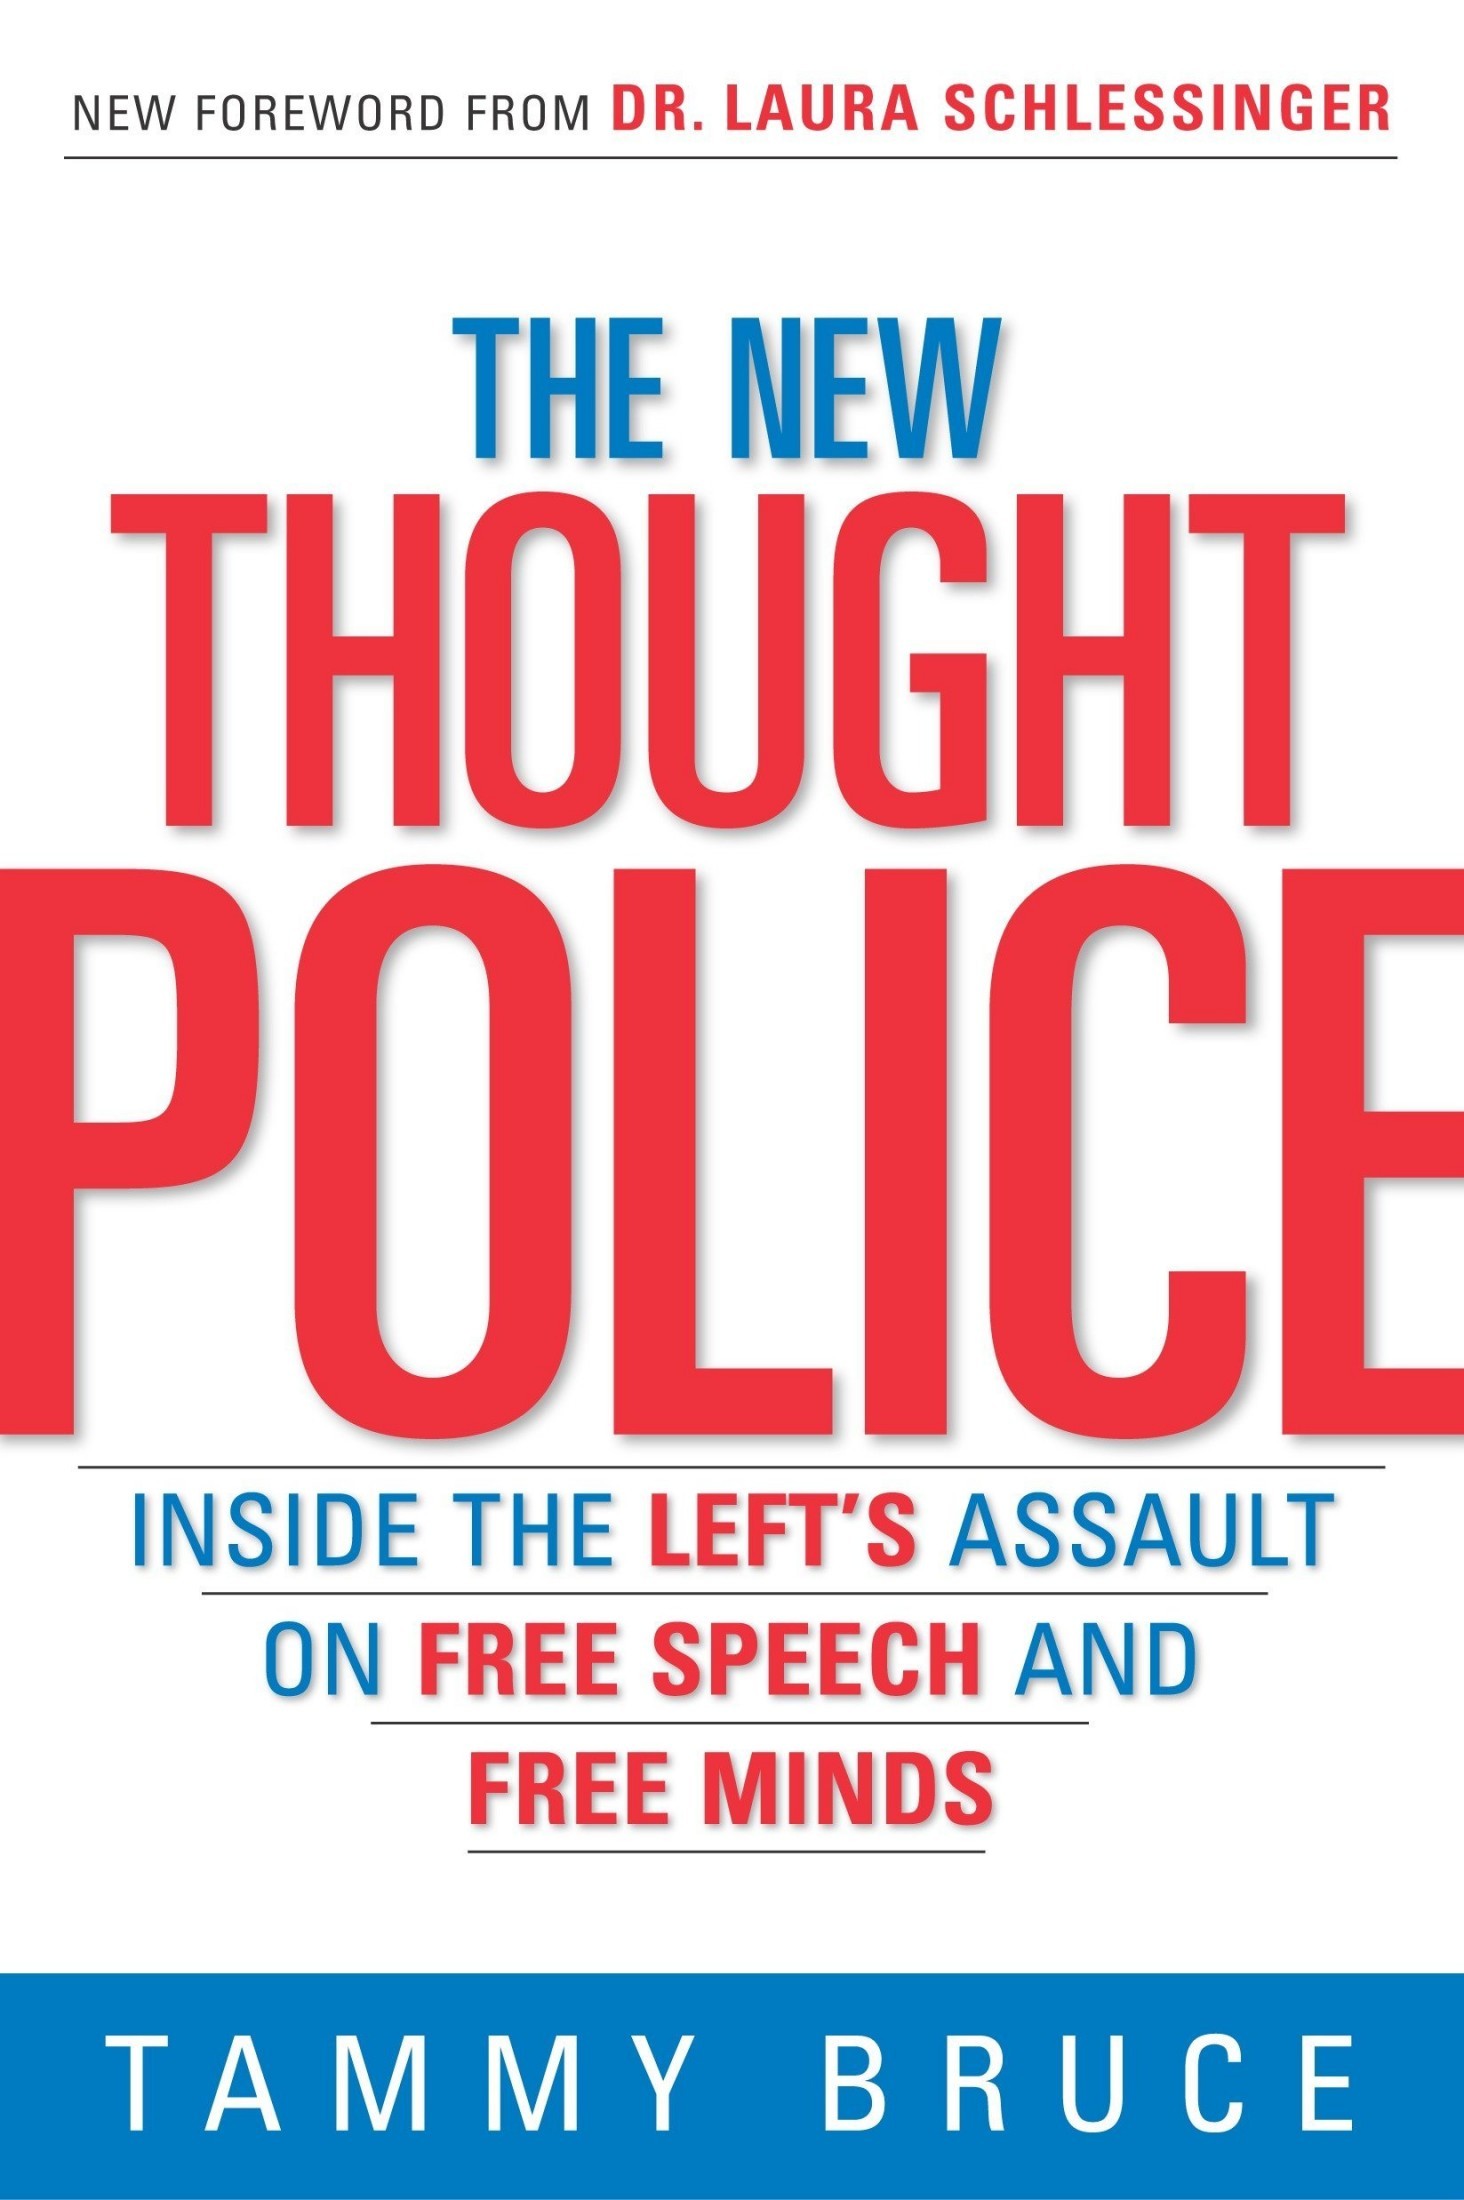 The New Thought Police: Inside the Left's Assault on Free Speech and Free Minds